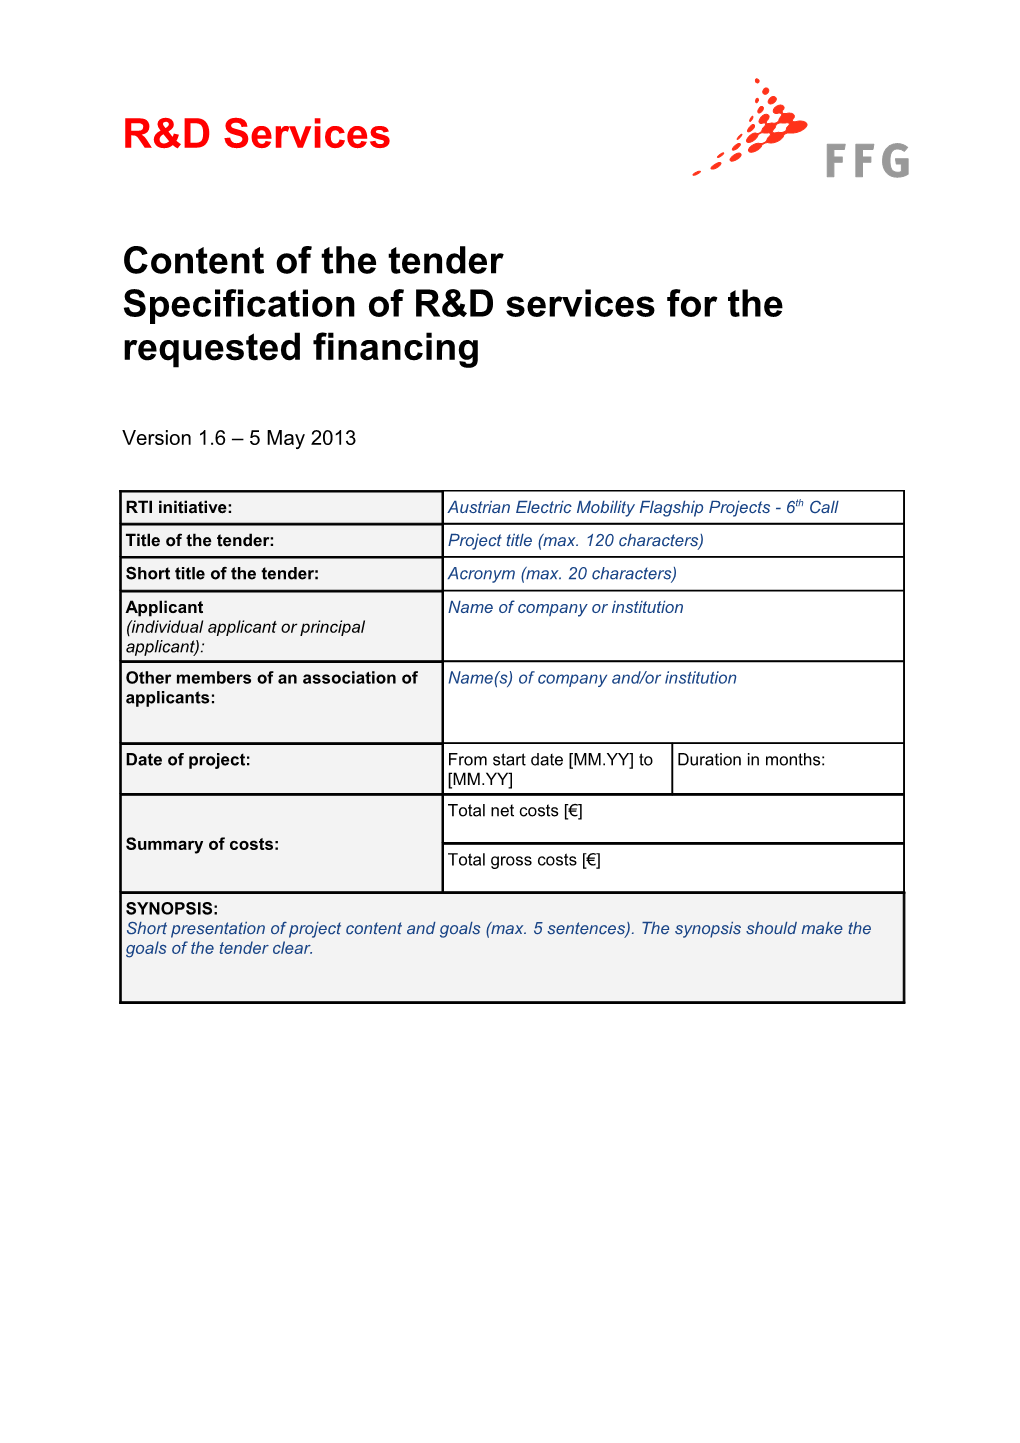 Content of the Tender Specification of R&D Services for the Requested Financing